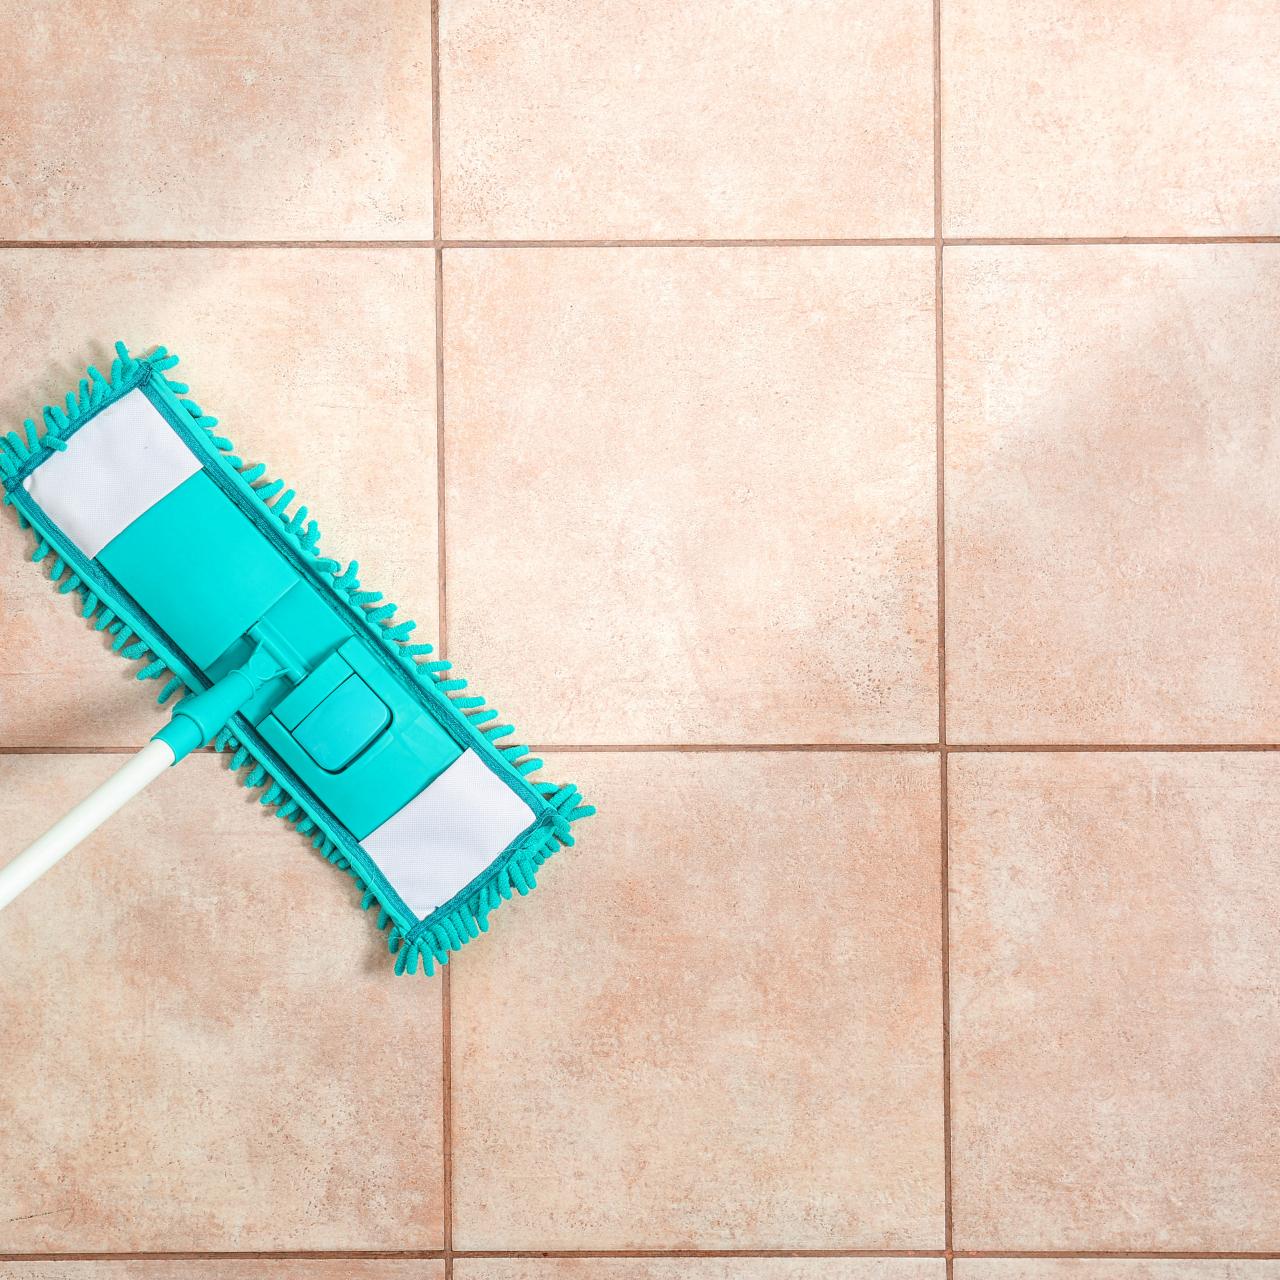 How to Clean and Remove Grease Out of Kitchen Grout